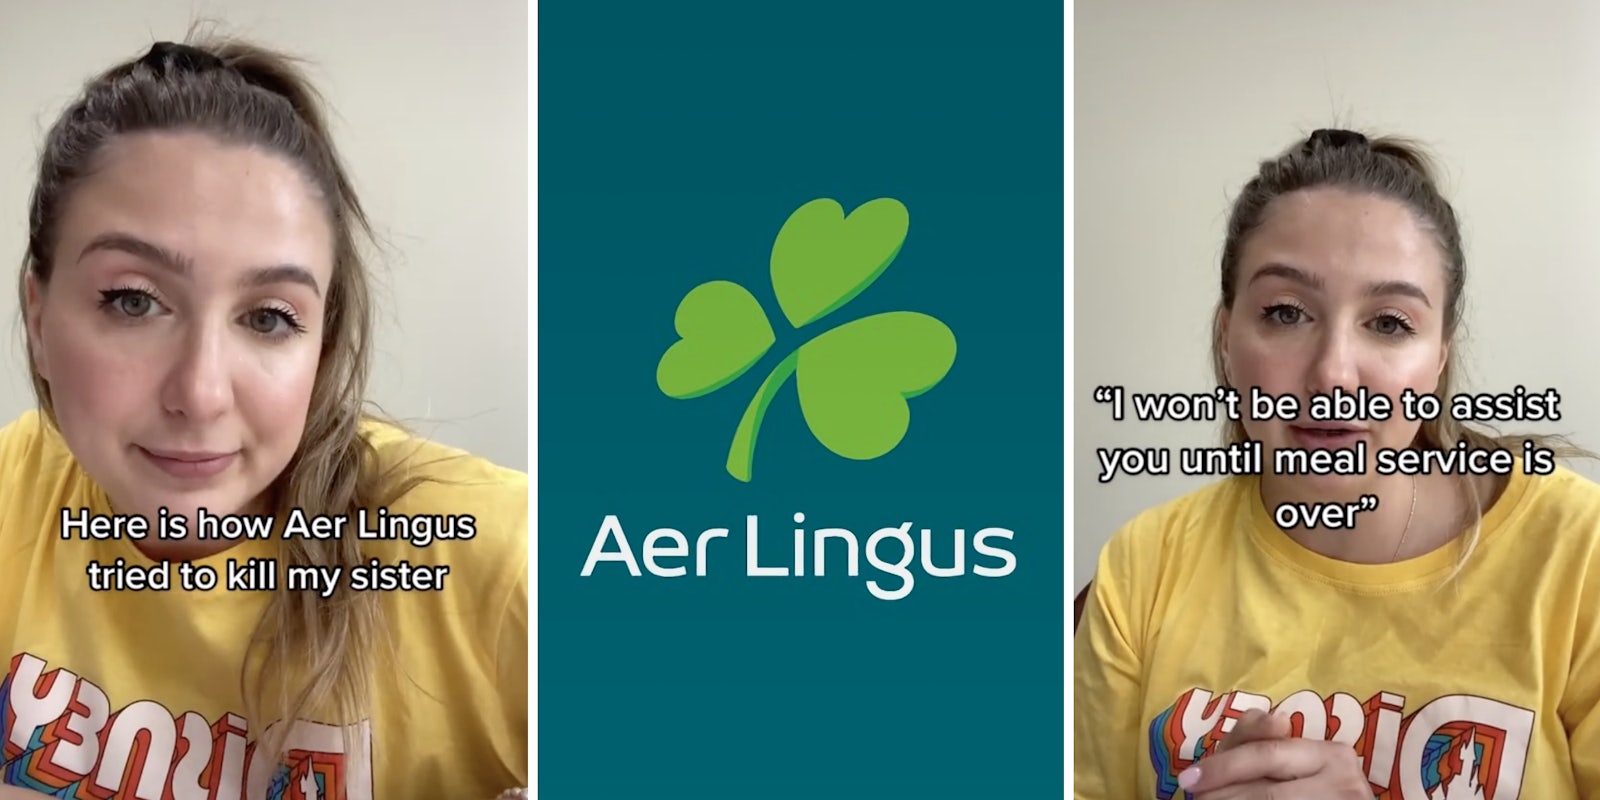 blonde woman in a yellow shirt explaining a story (l) aer lingus logo (c) (r)